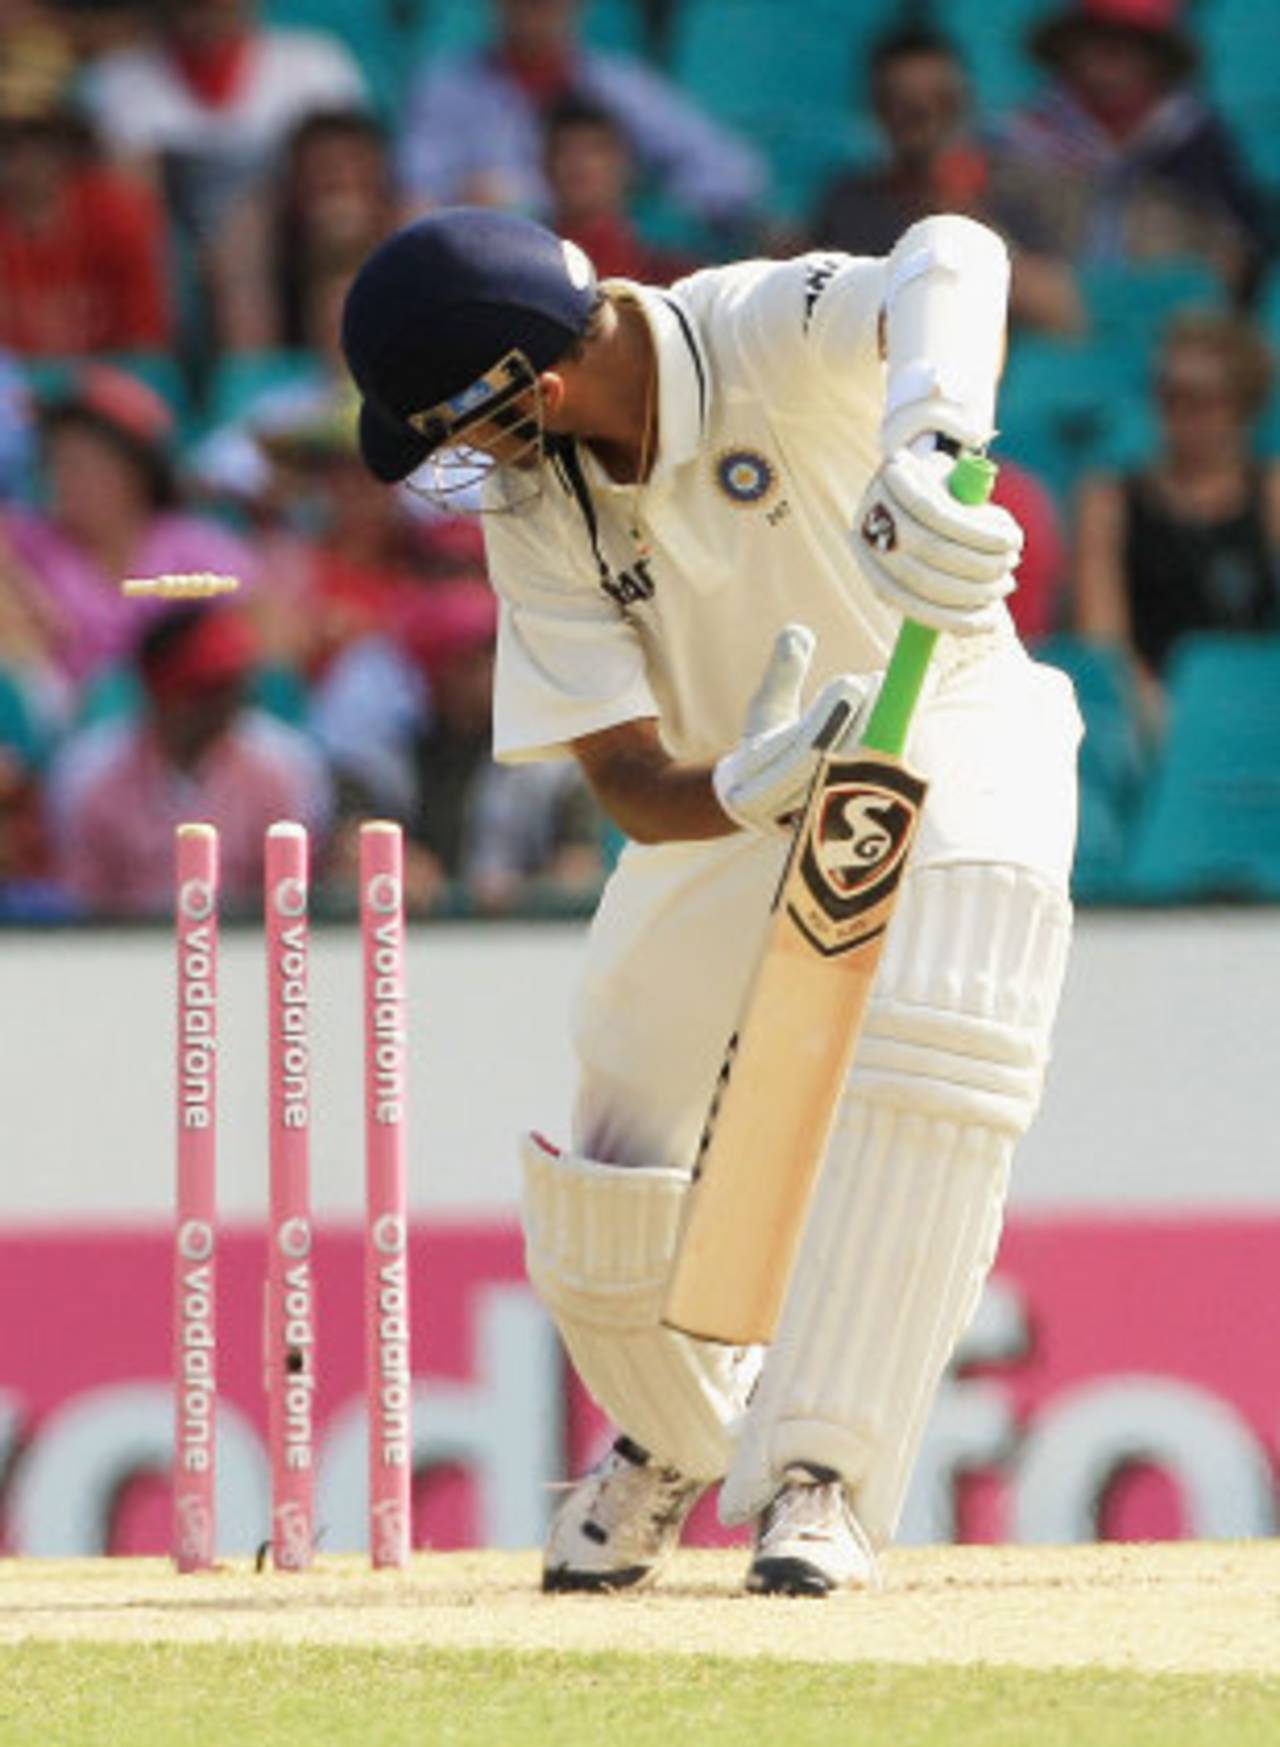 Just two more such dismissals, and the world record will belong to Rahul Dravid&nbsp;&nbsp;&bull;&nbsp;&nbsp;Getty Images